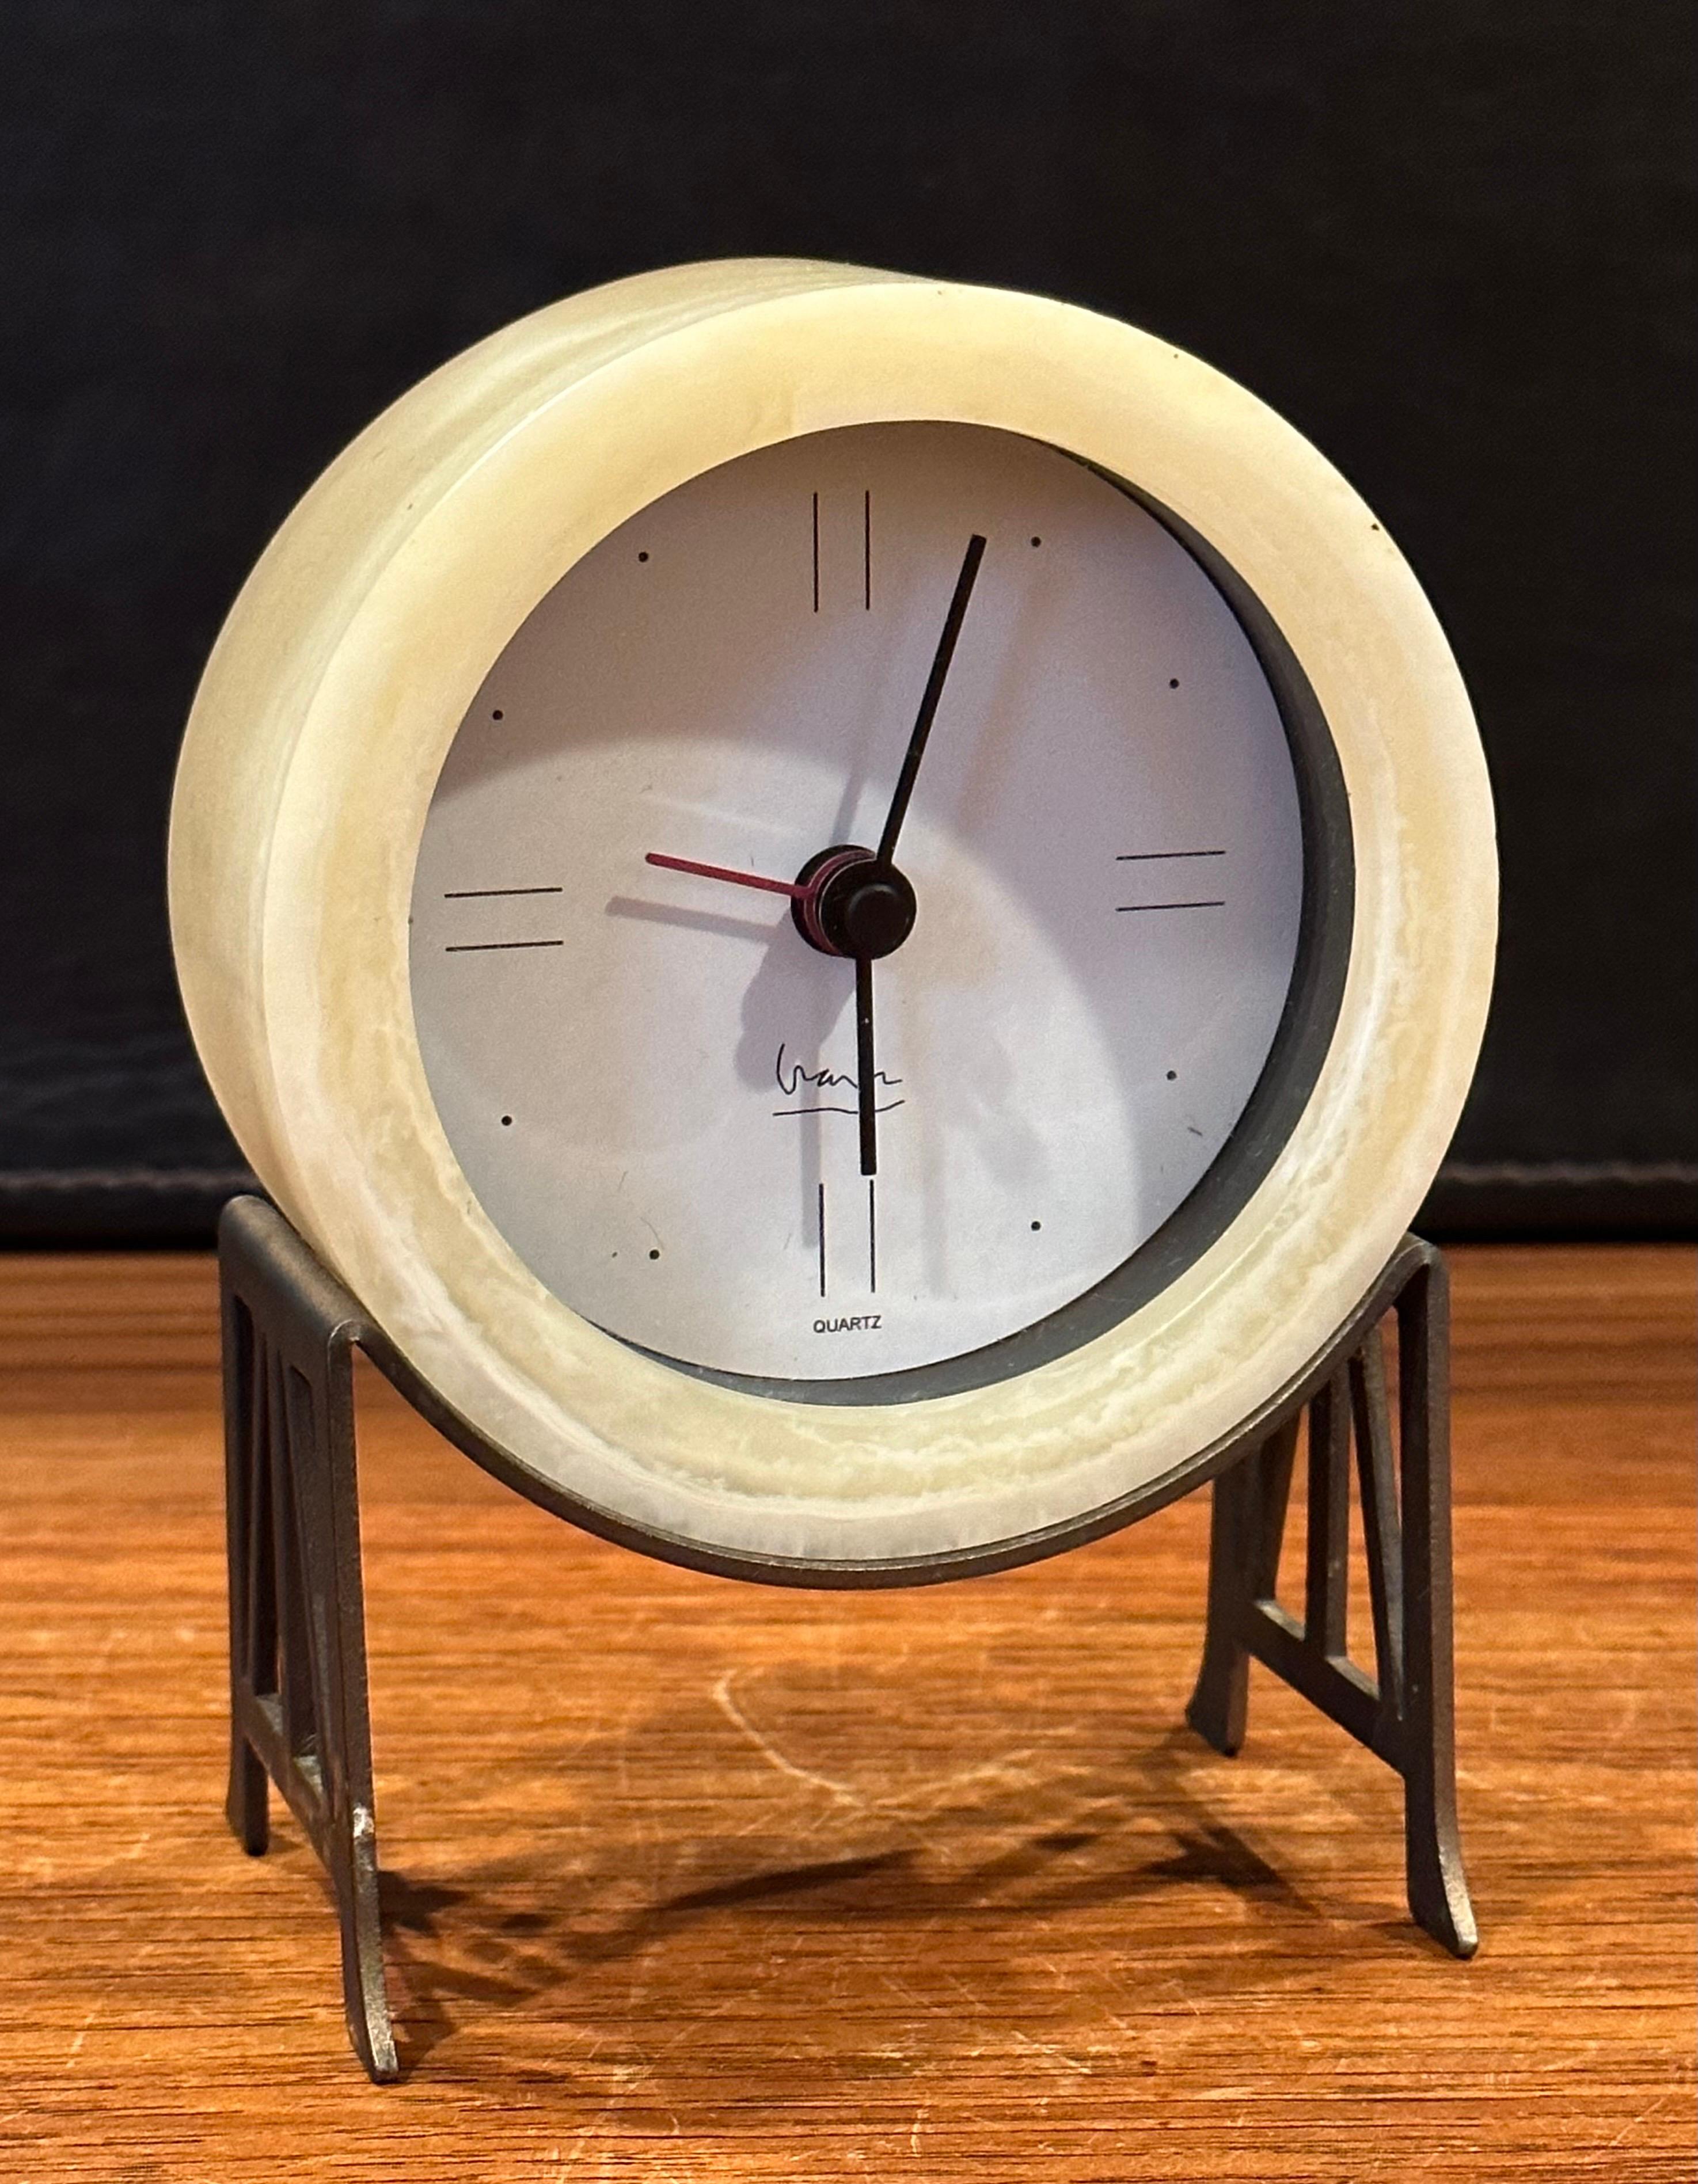 A nice post-modern desk clock by Michael Graves, circa the 1980s. The clock is in good vintage condition and measures 4